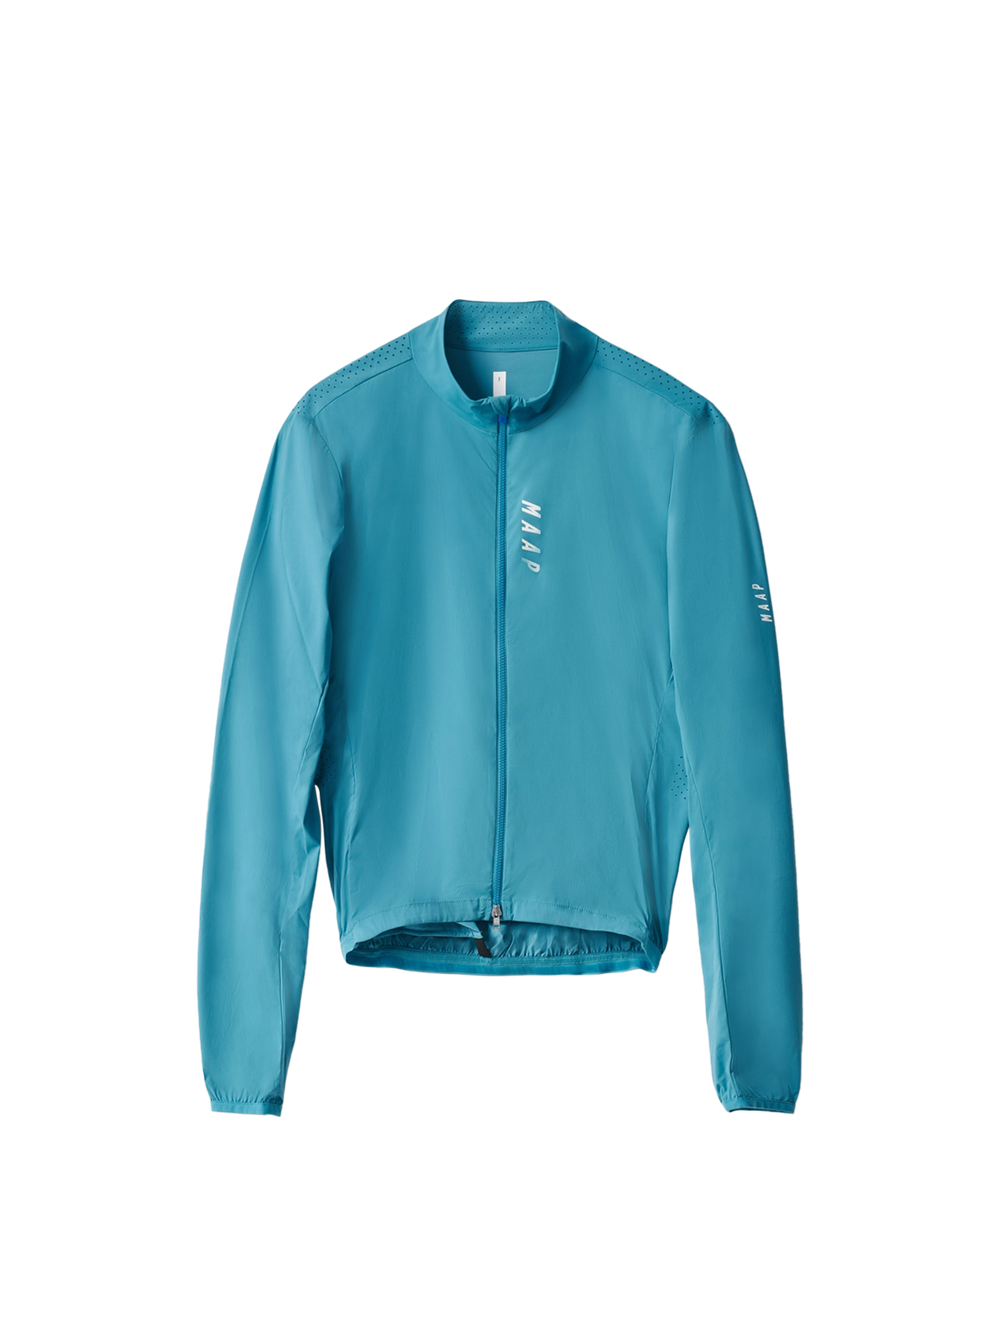 Product Image for Draft Team Jacket